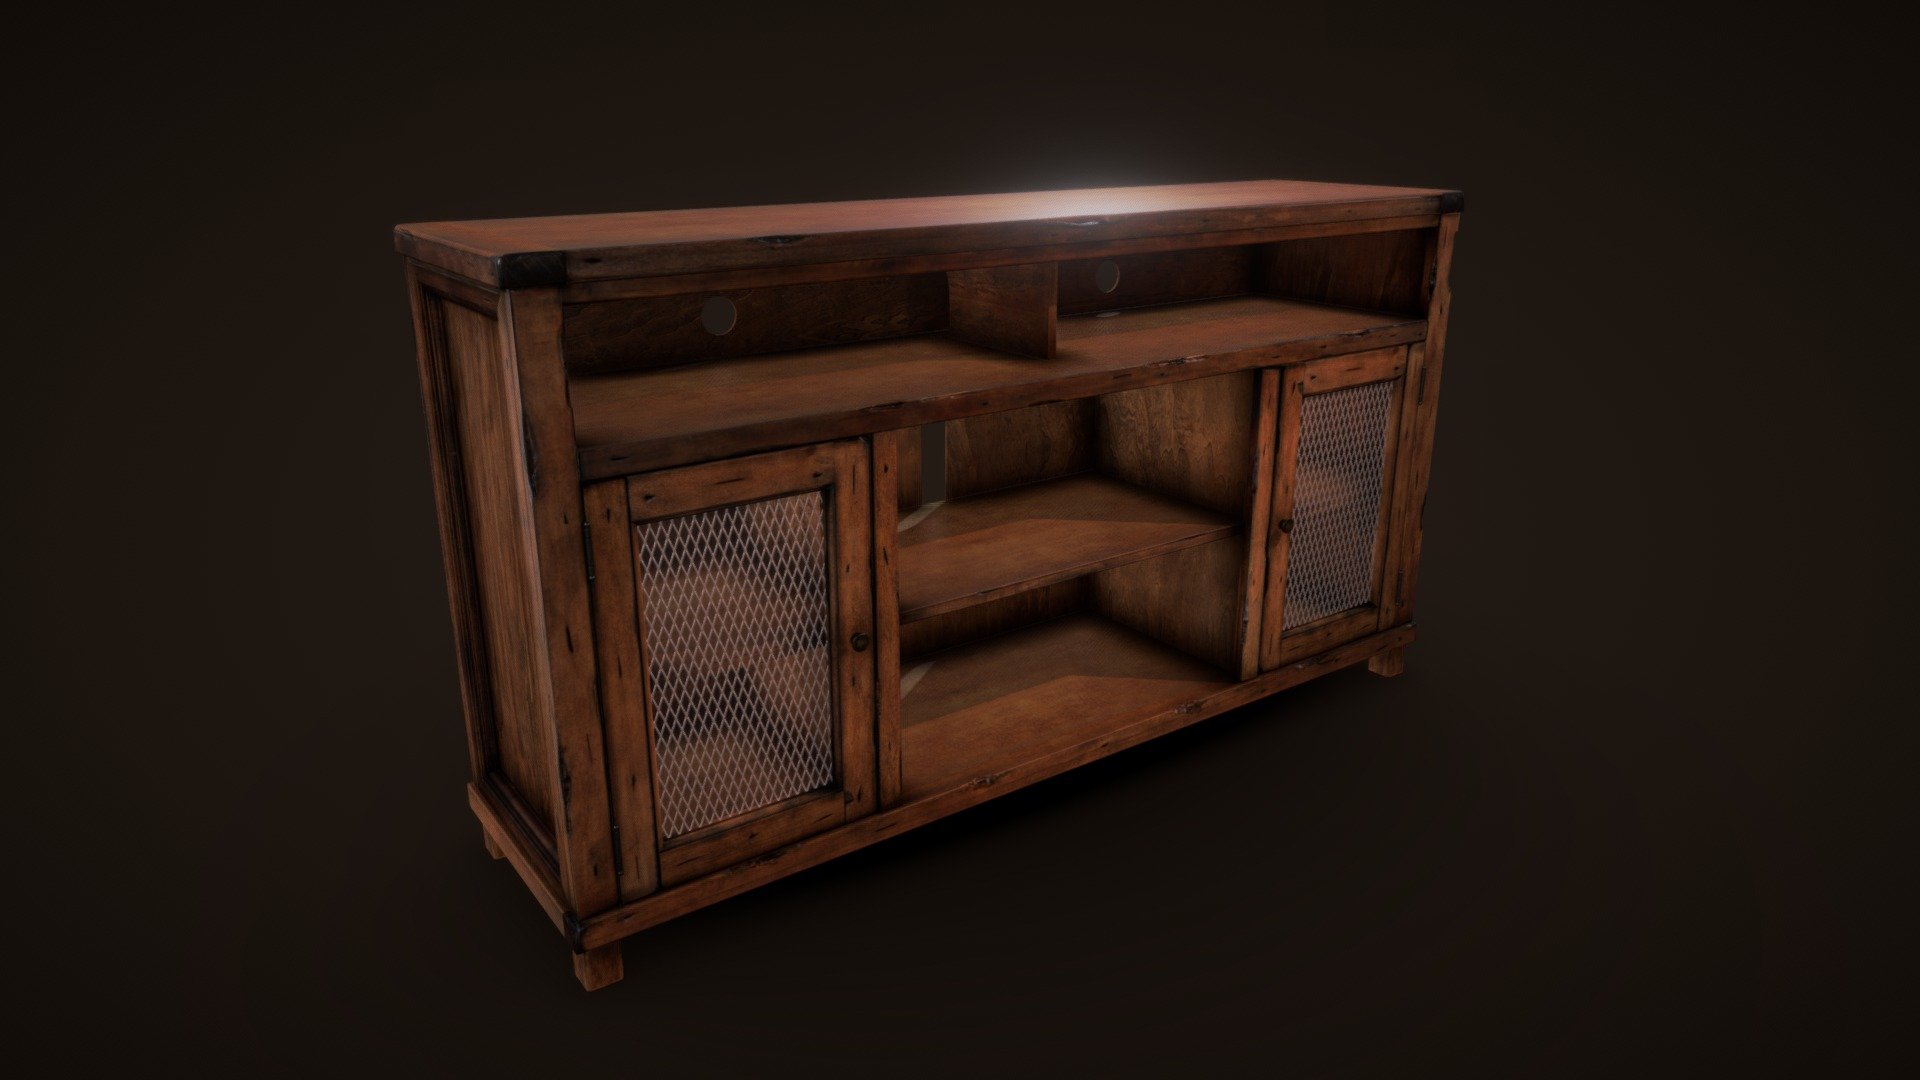 I did  this model as a texture study and high modelling also using a real image as reference and baking the textures from the real one to the model - TV Stand Model - 3D model by Vinnygf 3d model